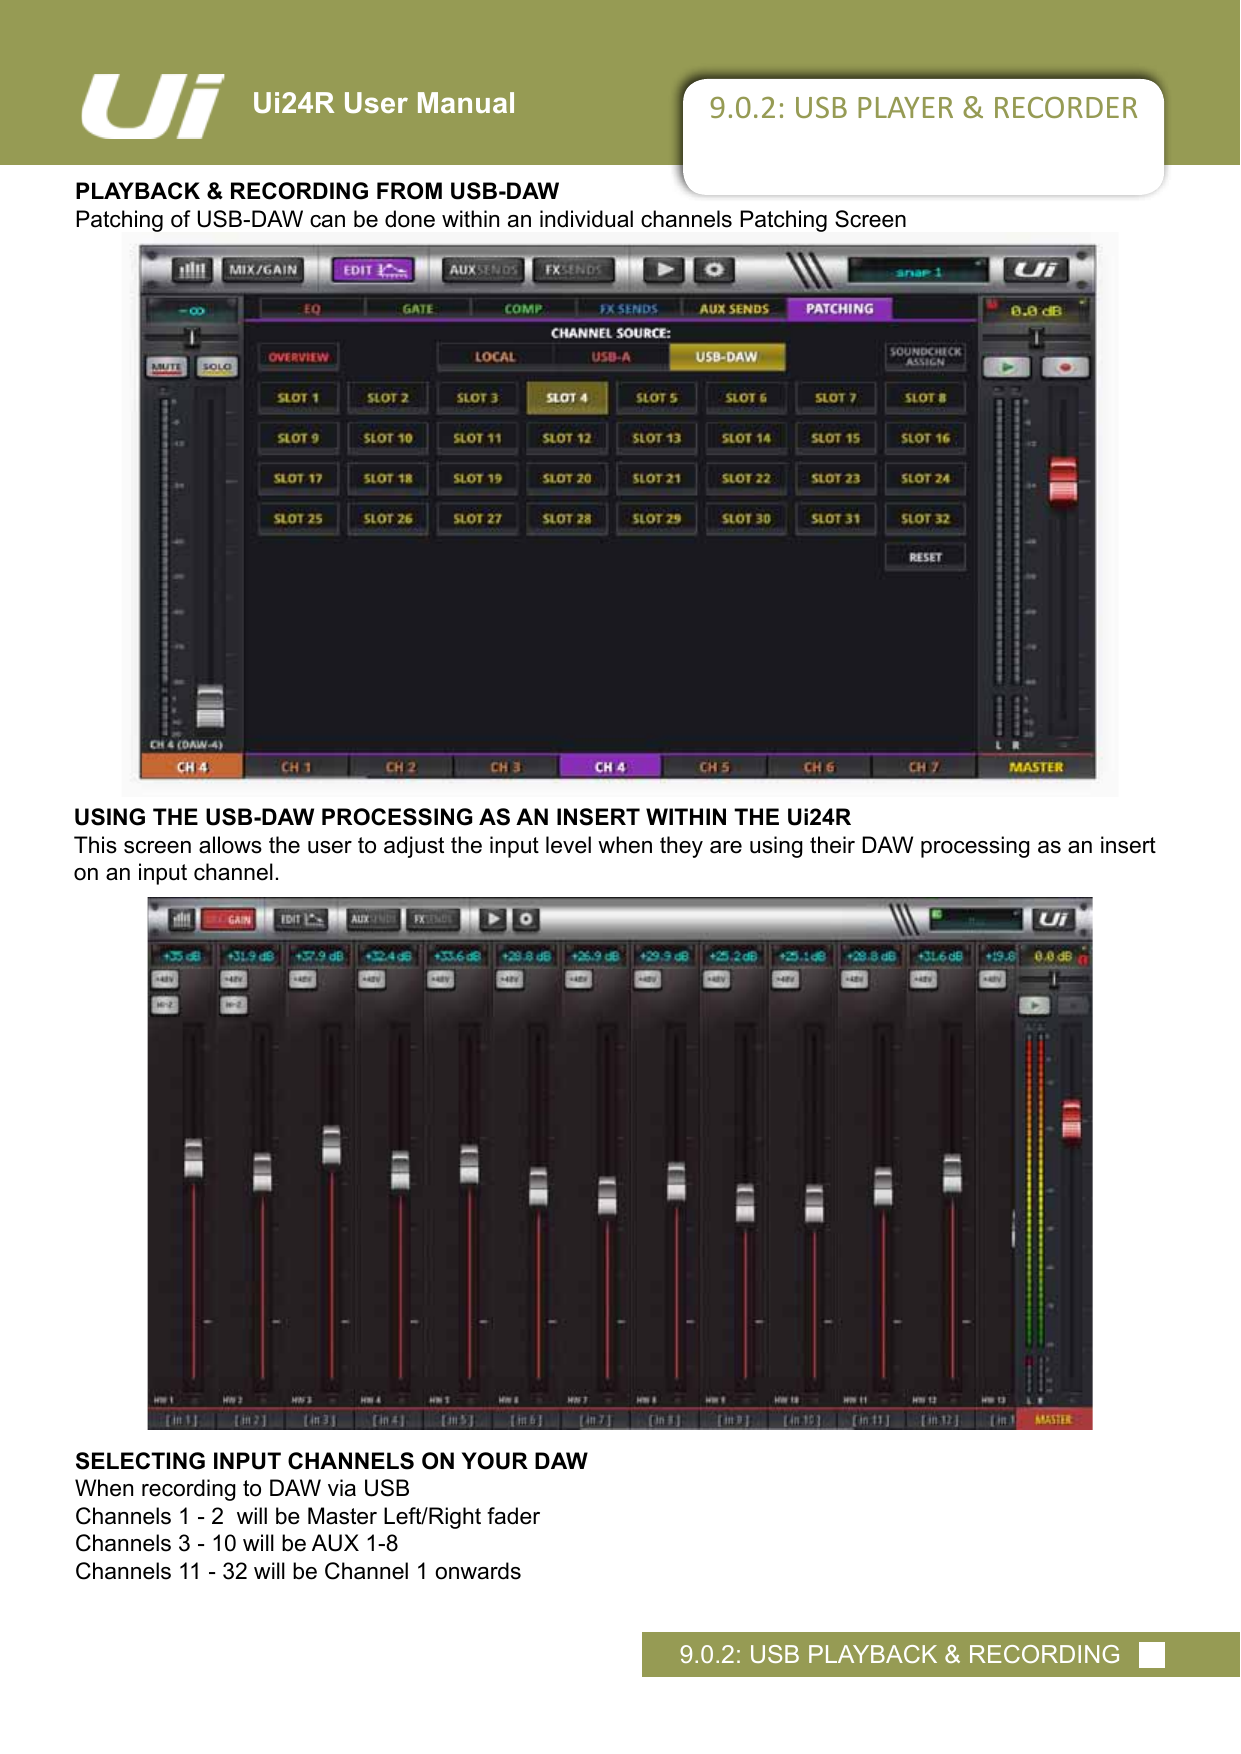 Ui24R User Manual 9.0.2: USB PLAYER &amp; RECORDERPLAYBACK &amp; RECORDING FROM USB-DAWPatching of USB-DAW can be done within an individual channels Patching Screen9.0.2: USB PLAYBACK &amp; RECORDINGUSING THE USB-DAW PROCESSING AS AN INSERT WITHIN THE Ui24RThis screen allows the user to adjust the input level when they are using their DAW processing as an insert on an input channel. SELECTING INPUT CHANNELS ON YOUR DAW When recording to DAW via USB Channels 1 - 2  will be Master Left/Right fader Channels 3 - 10 will be AUX 1-8Channels 11 - 32 will be Channel 1 onwards 